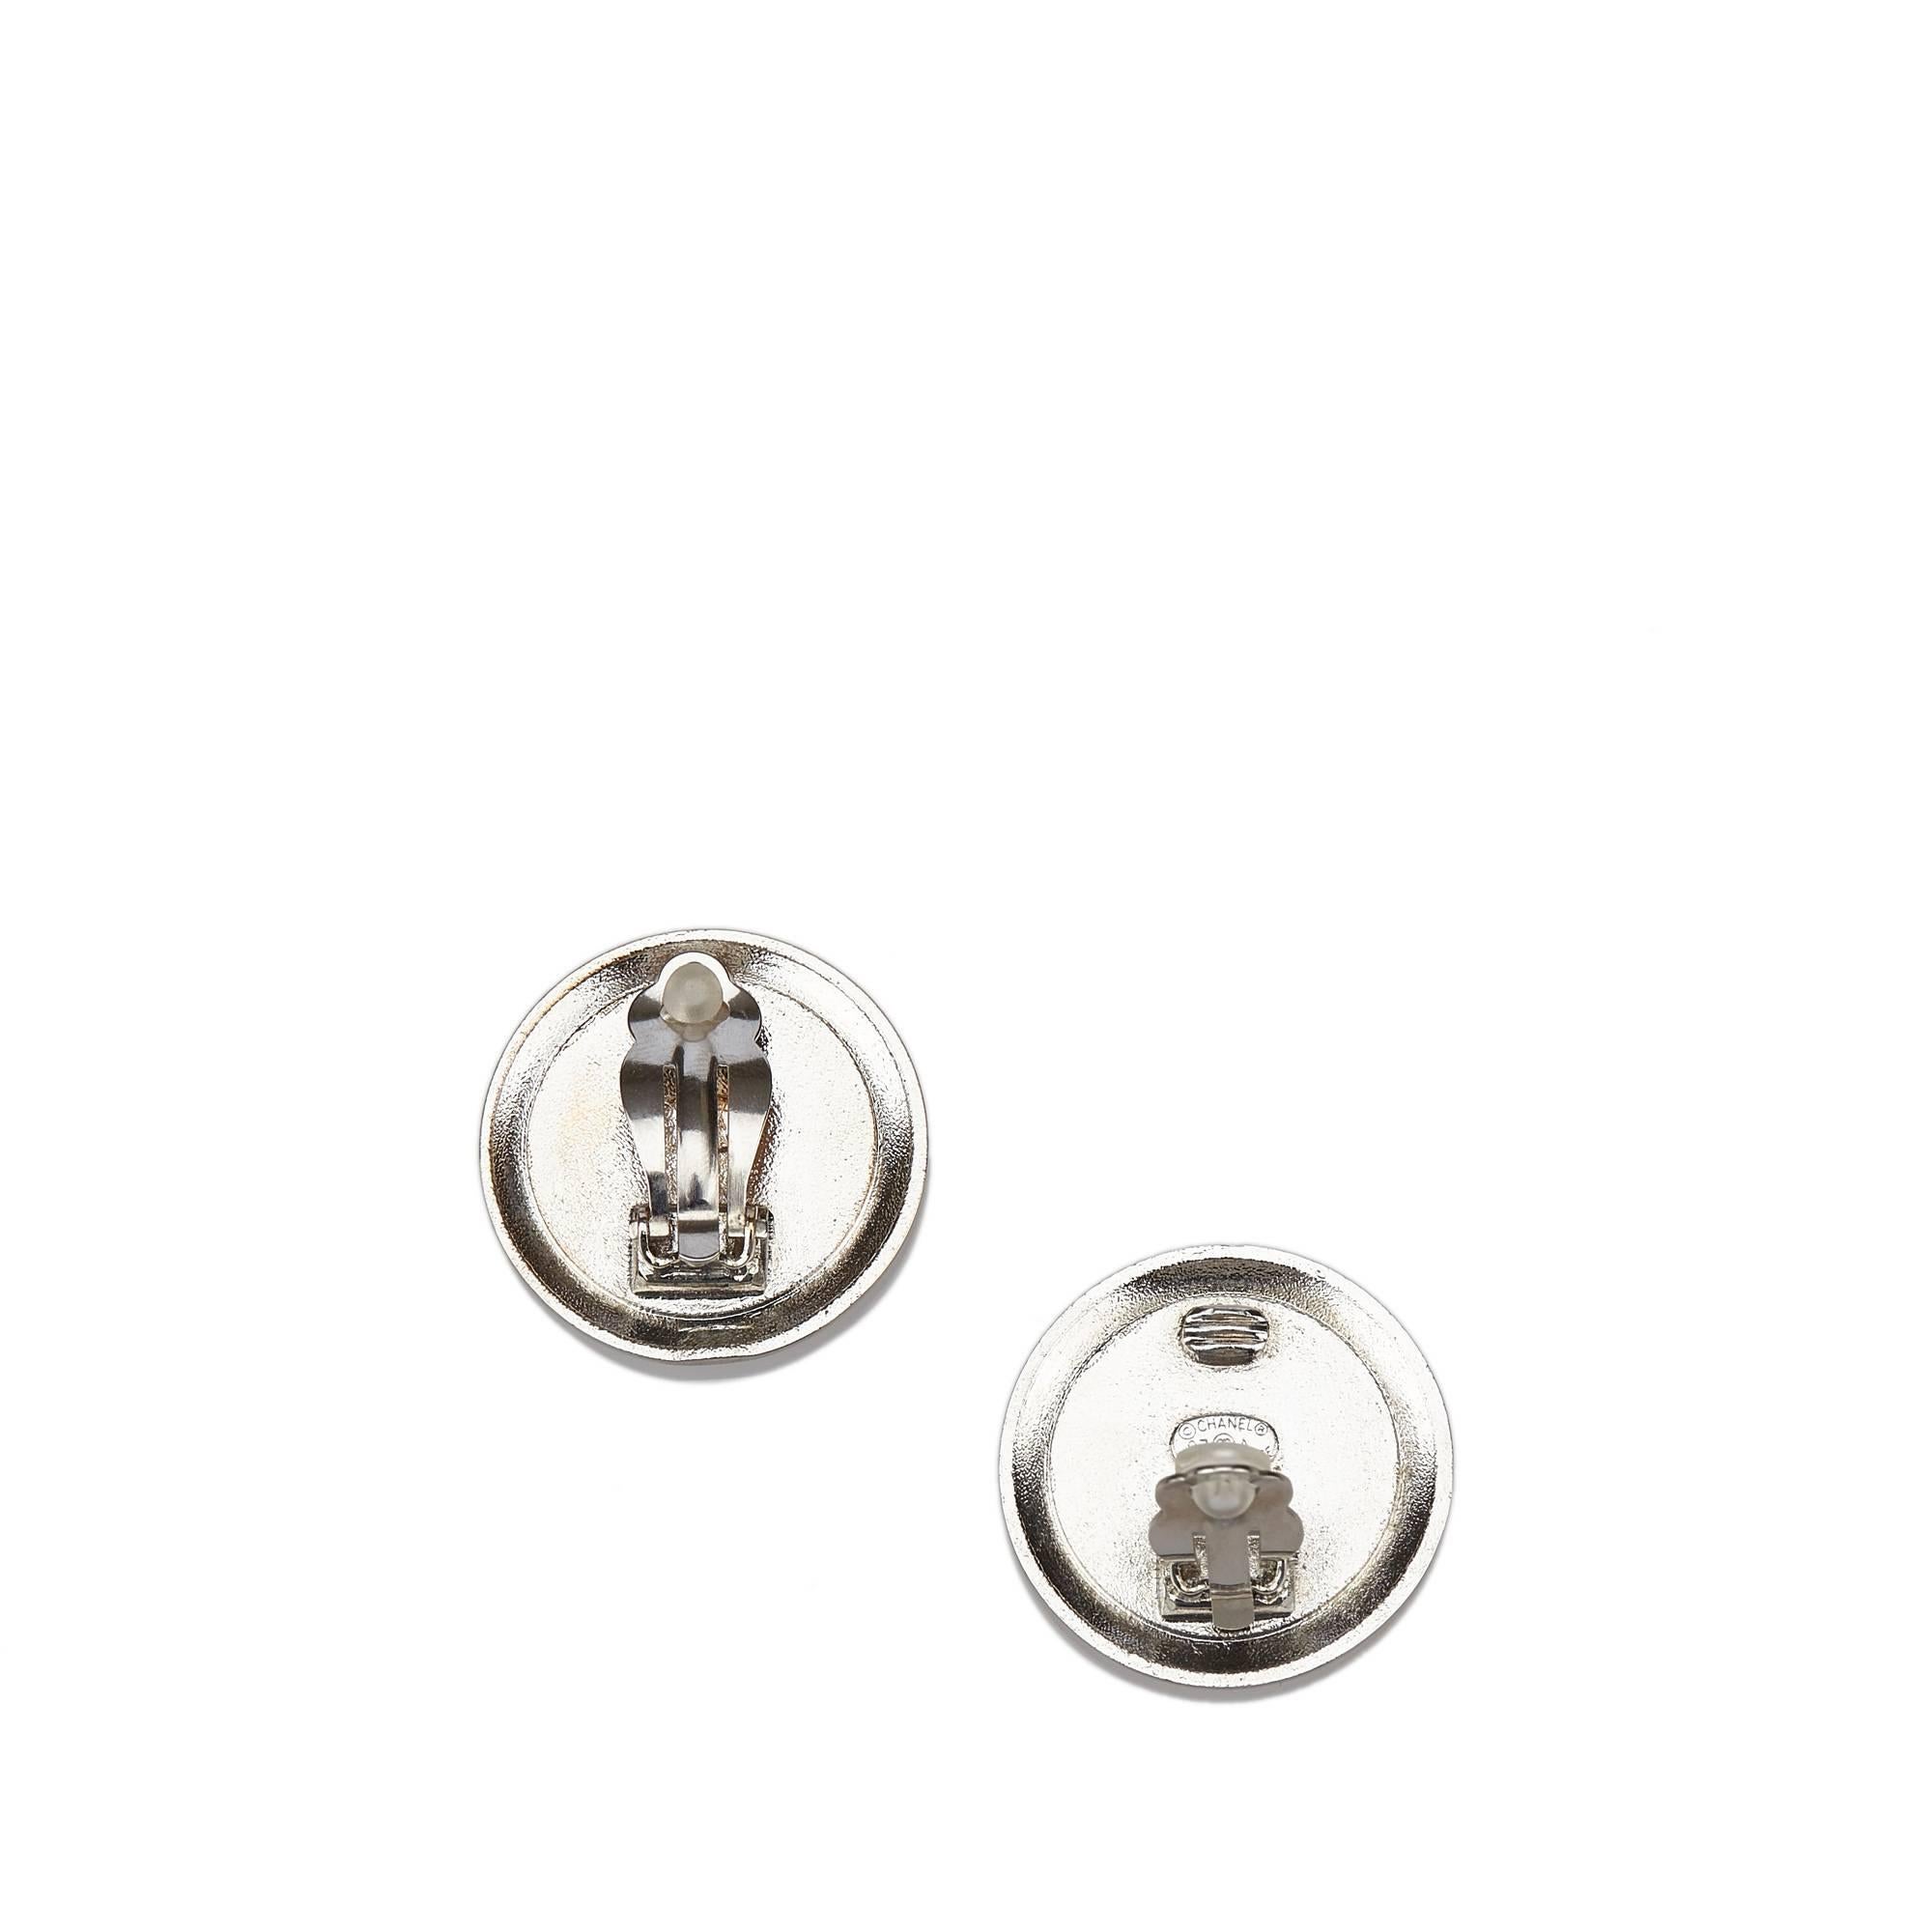 - These vintage 1997 Chanel round shape studs earrings feature a silver-tone metal hardware, a gold "CC" and a clip on closure.

- Made in France. 

- Size: 2.9cm x 2.9cm. 

- Include: Box. 

